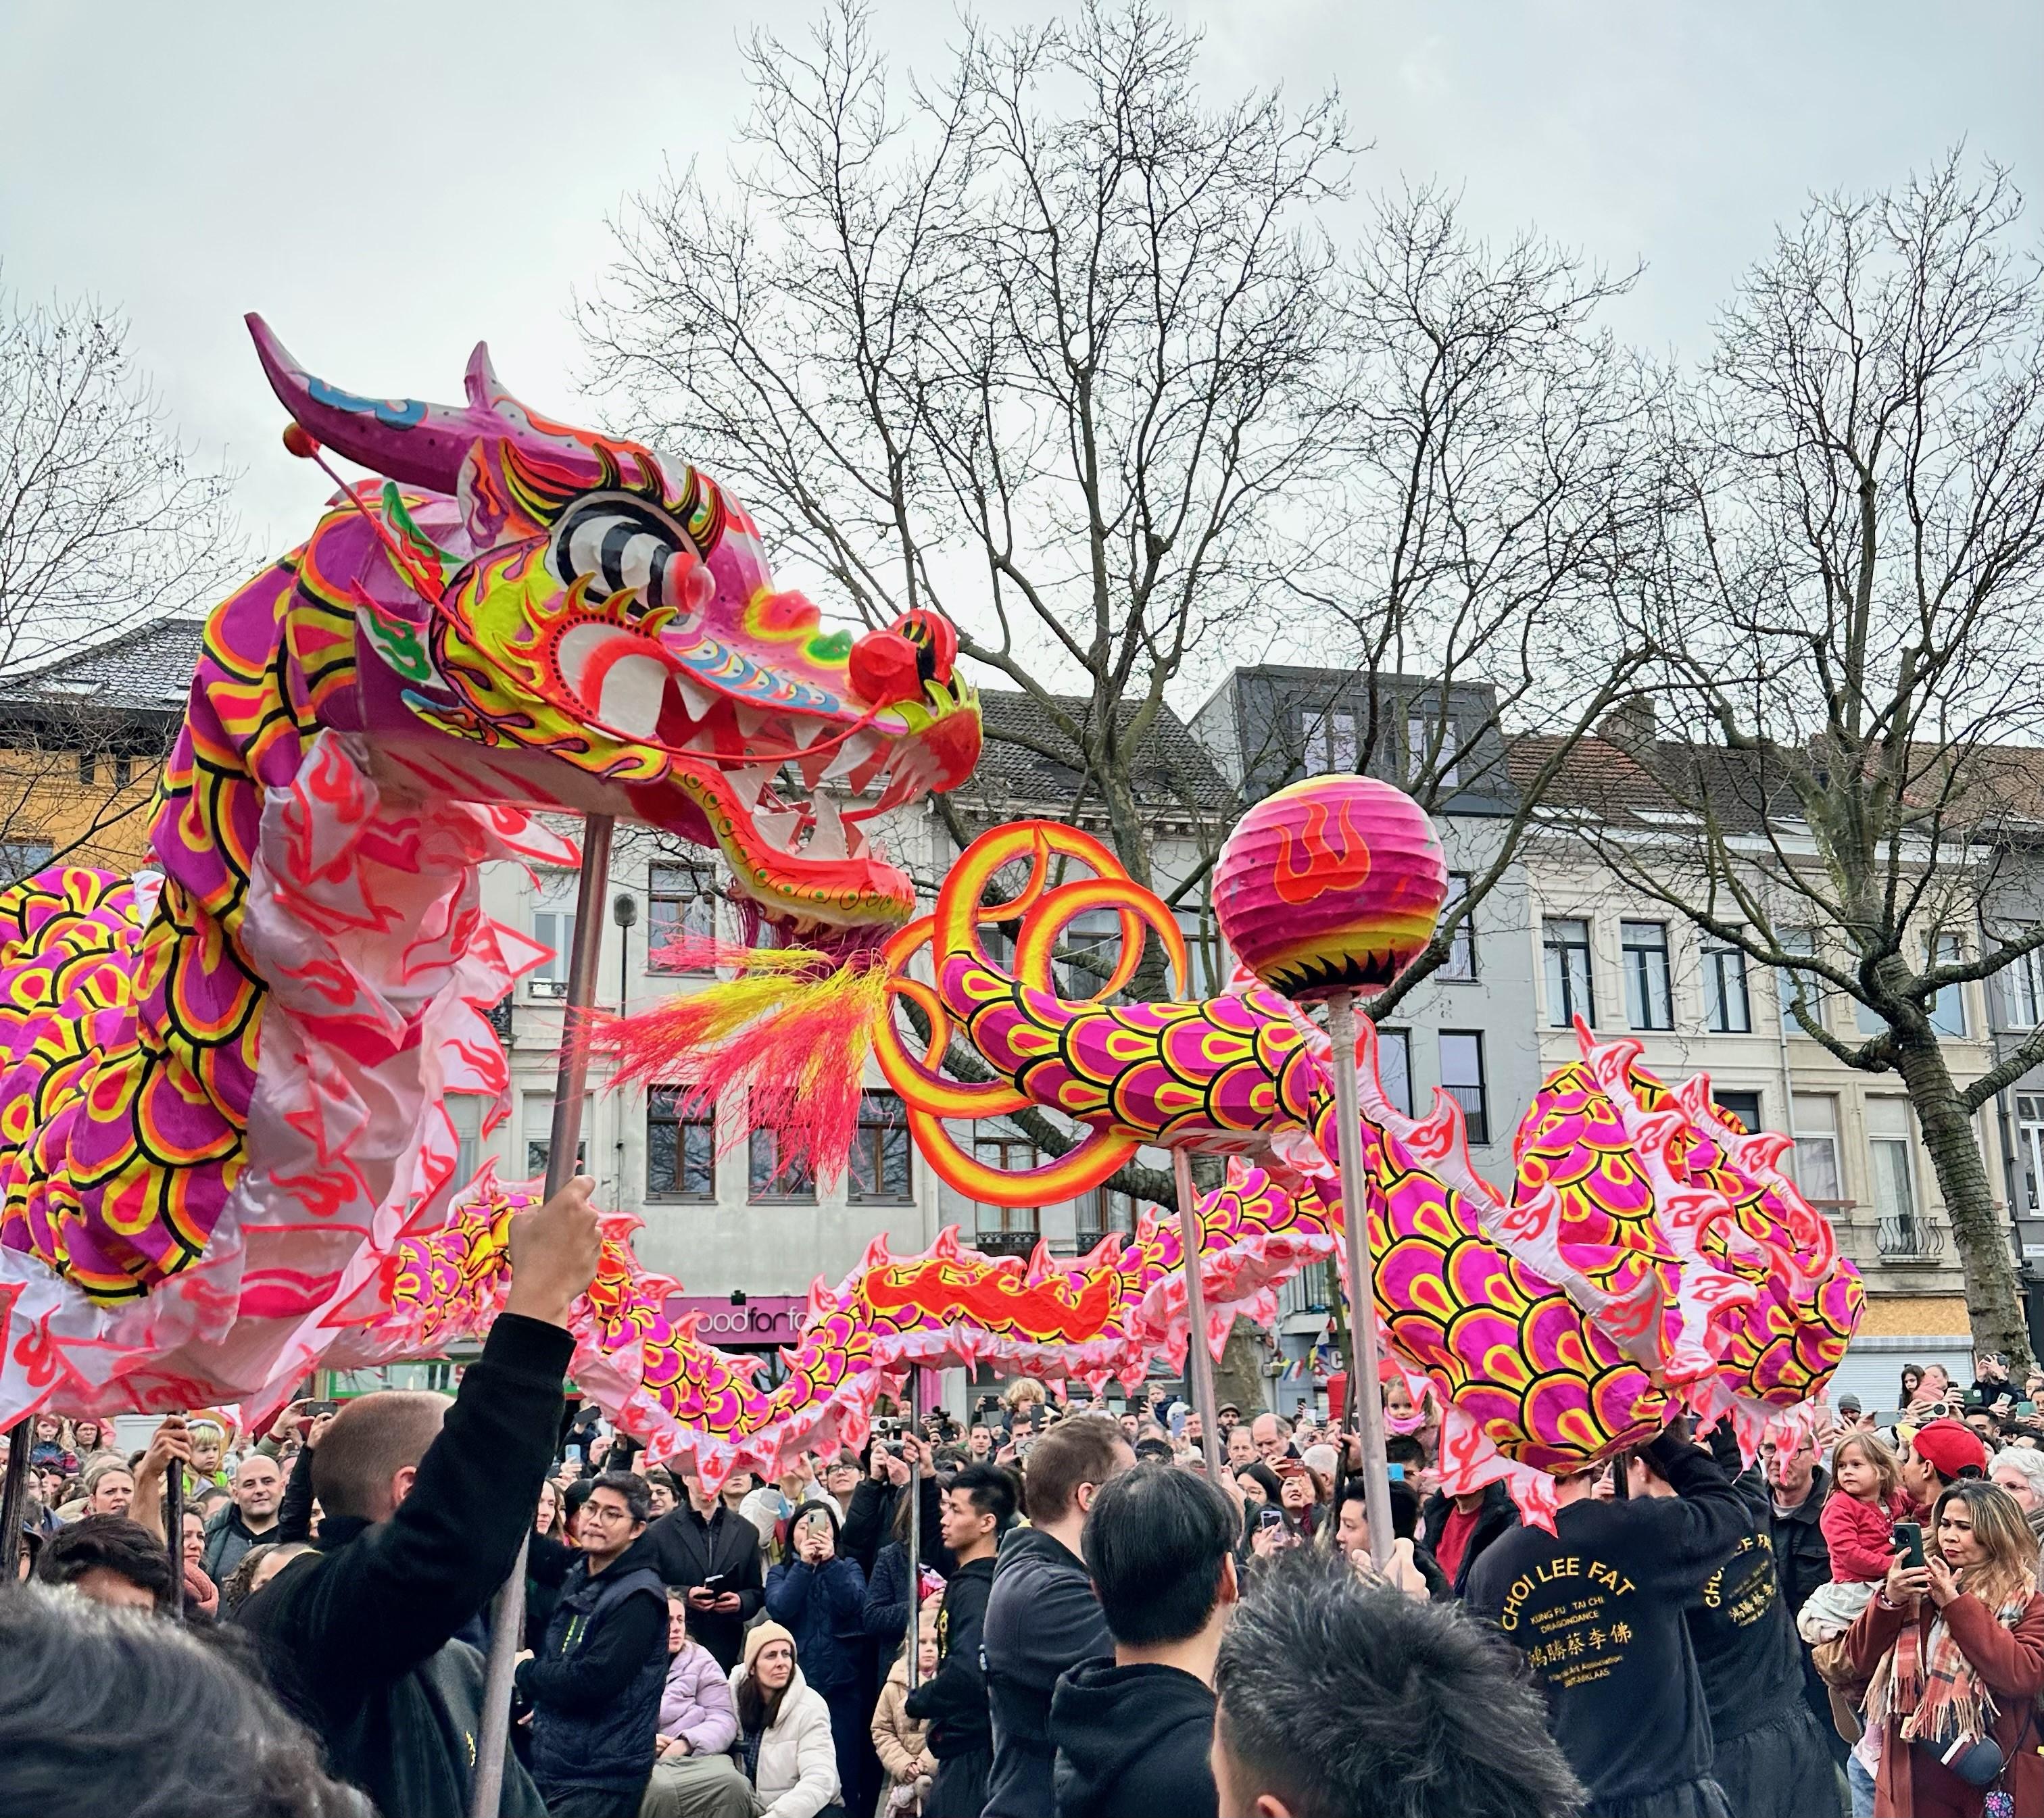 The lion dance parade held in Antwerp on February 10 (Antwerp time) attracted hundreds of Belgian and Chinese spectators to celebrate the start of the Chinese New Year.